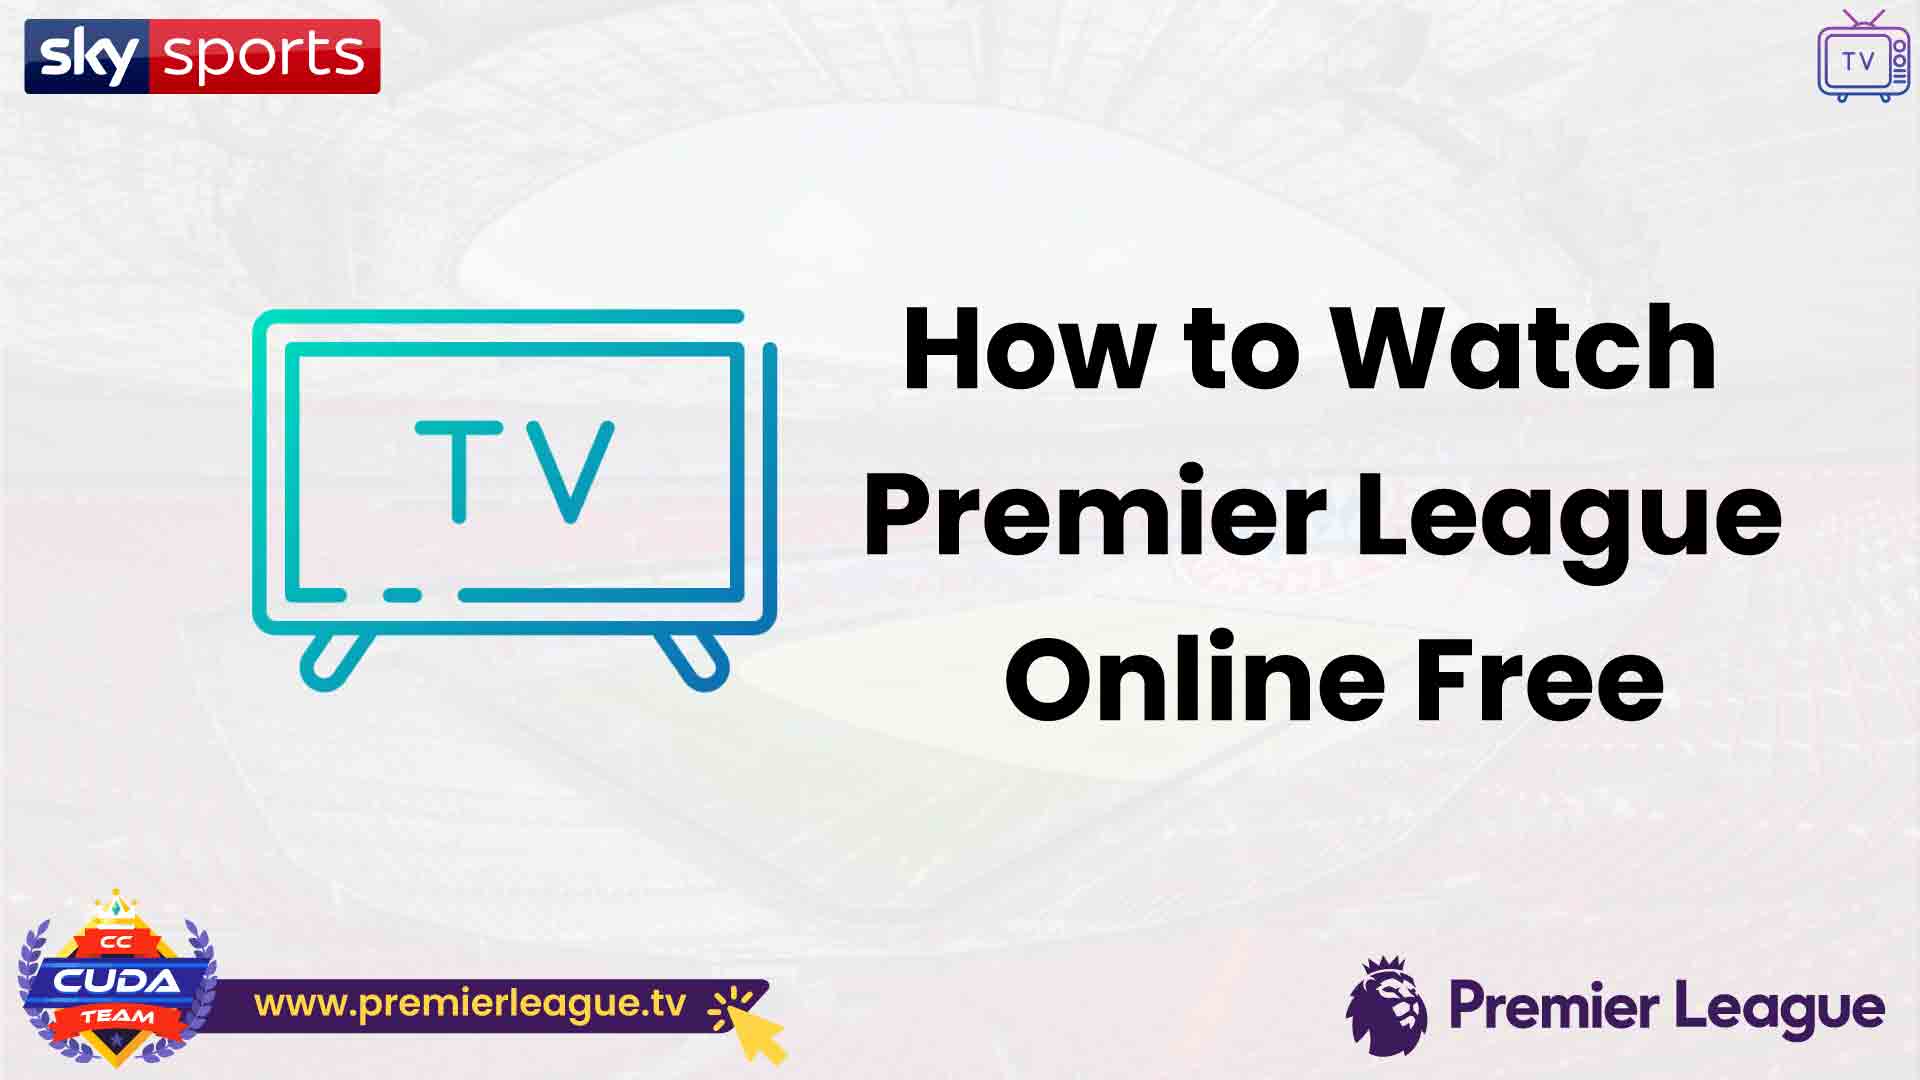 How to Watch Premier League Online Free